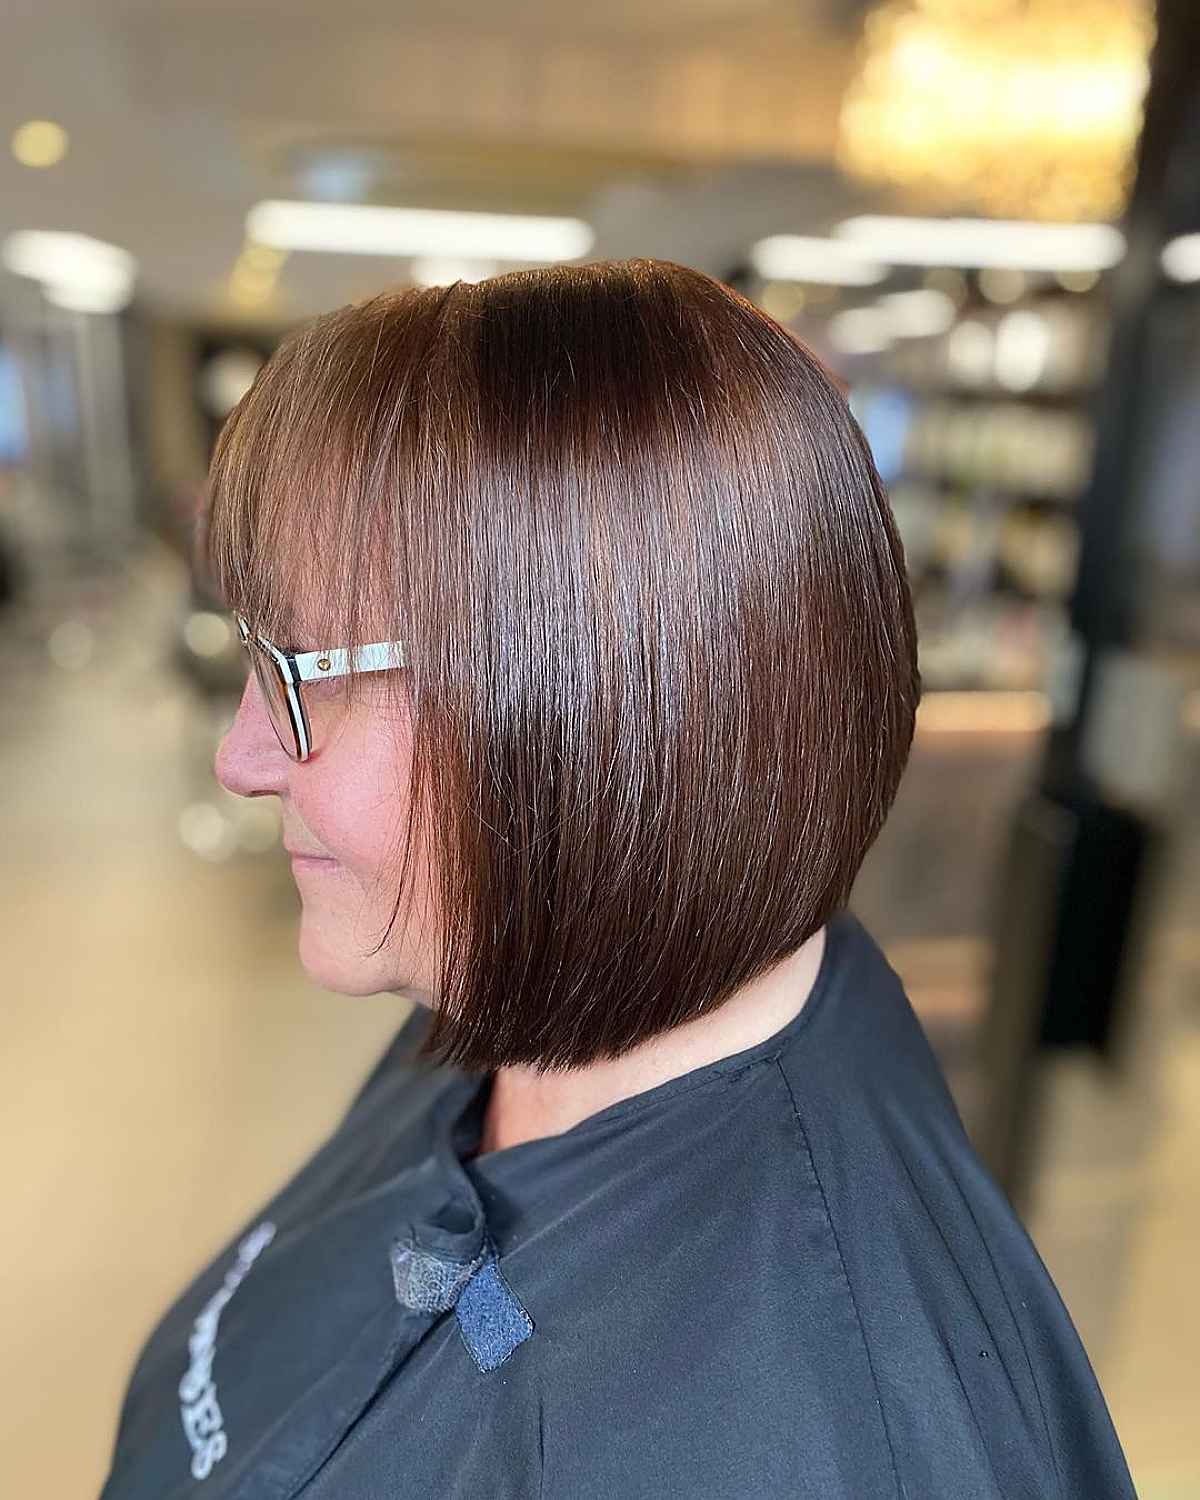 Haircut for overweight Women Over 50 with Glasses